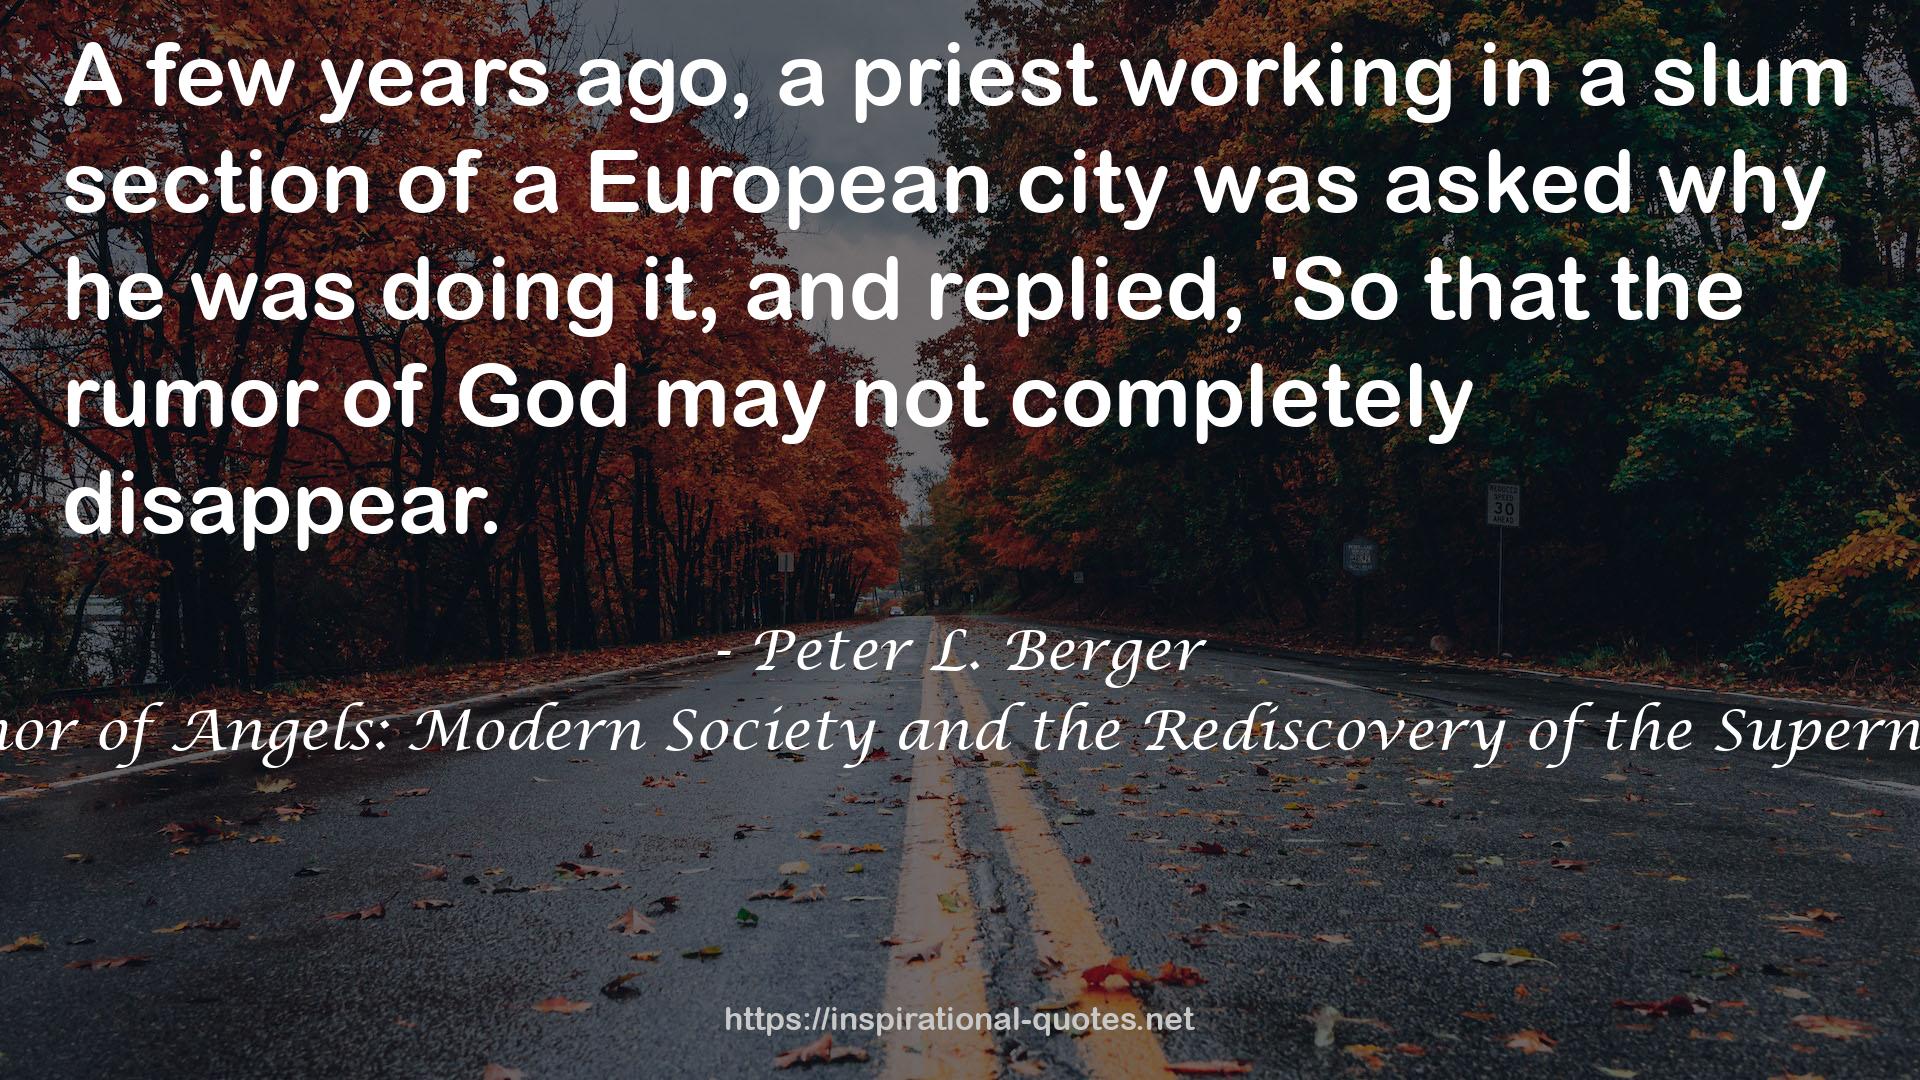 Peter L. Berger QUOTES